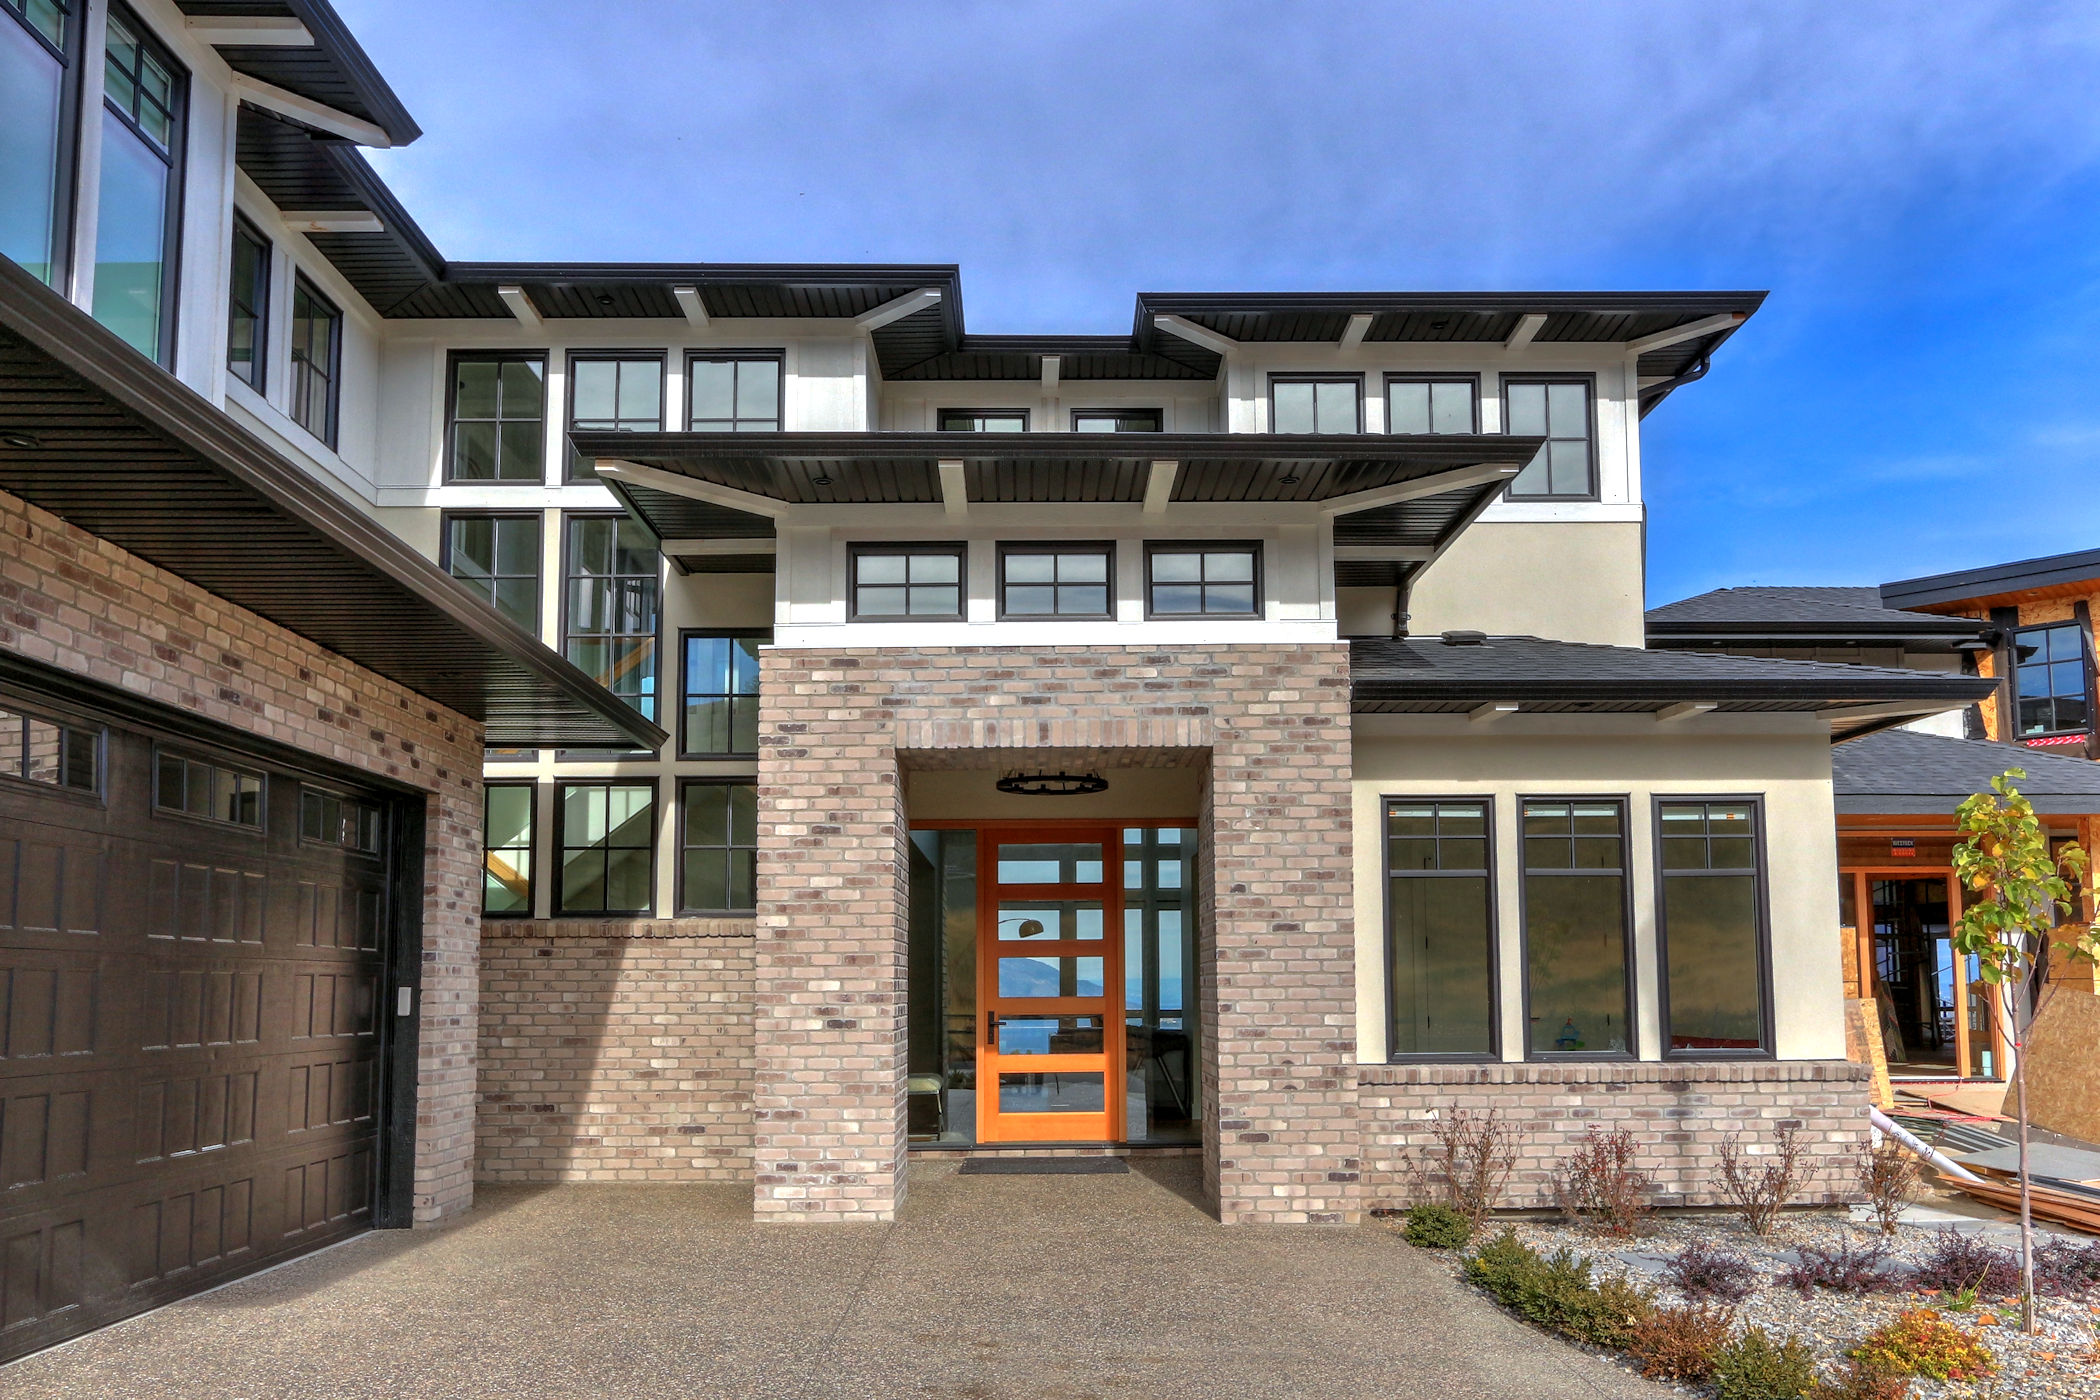 Front entrance of 470 Rockview Lane, a custom home build by Stark Homes